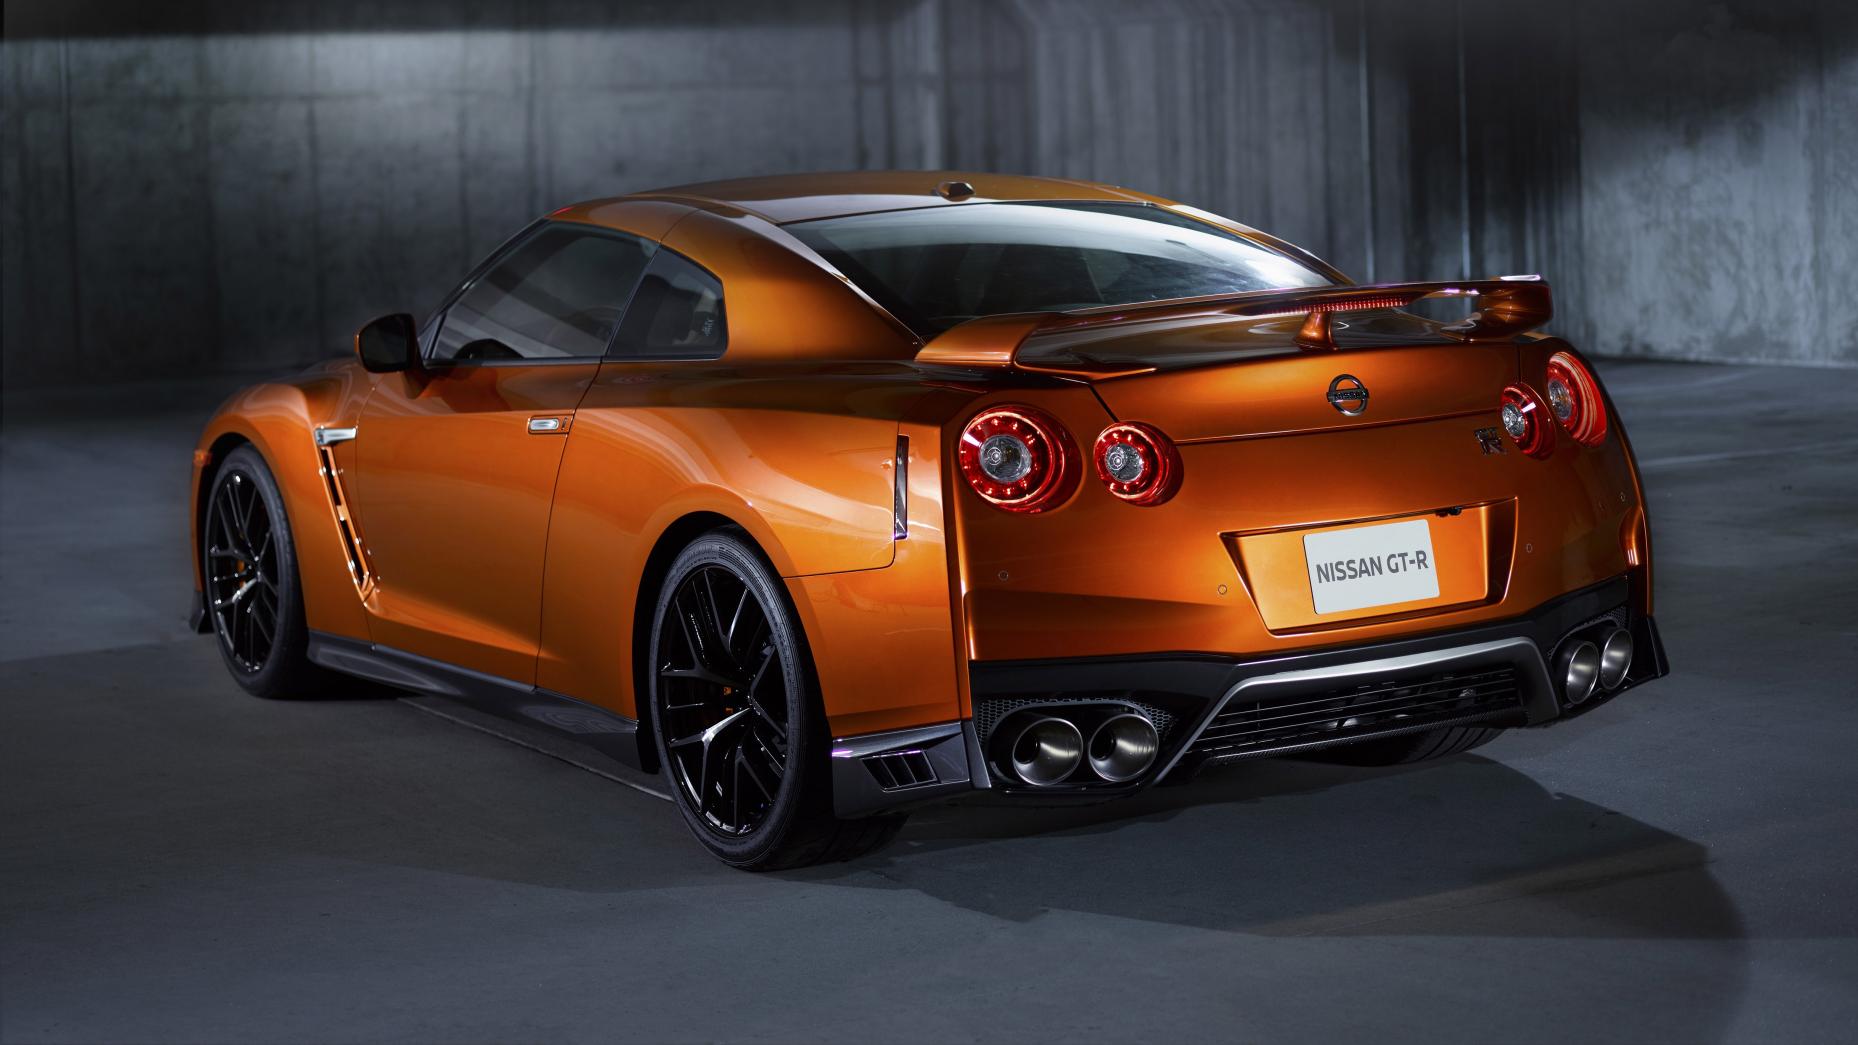 TopGear | Ten things you need to know about the new Nissan GT-R